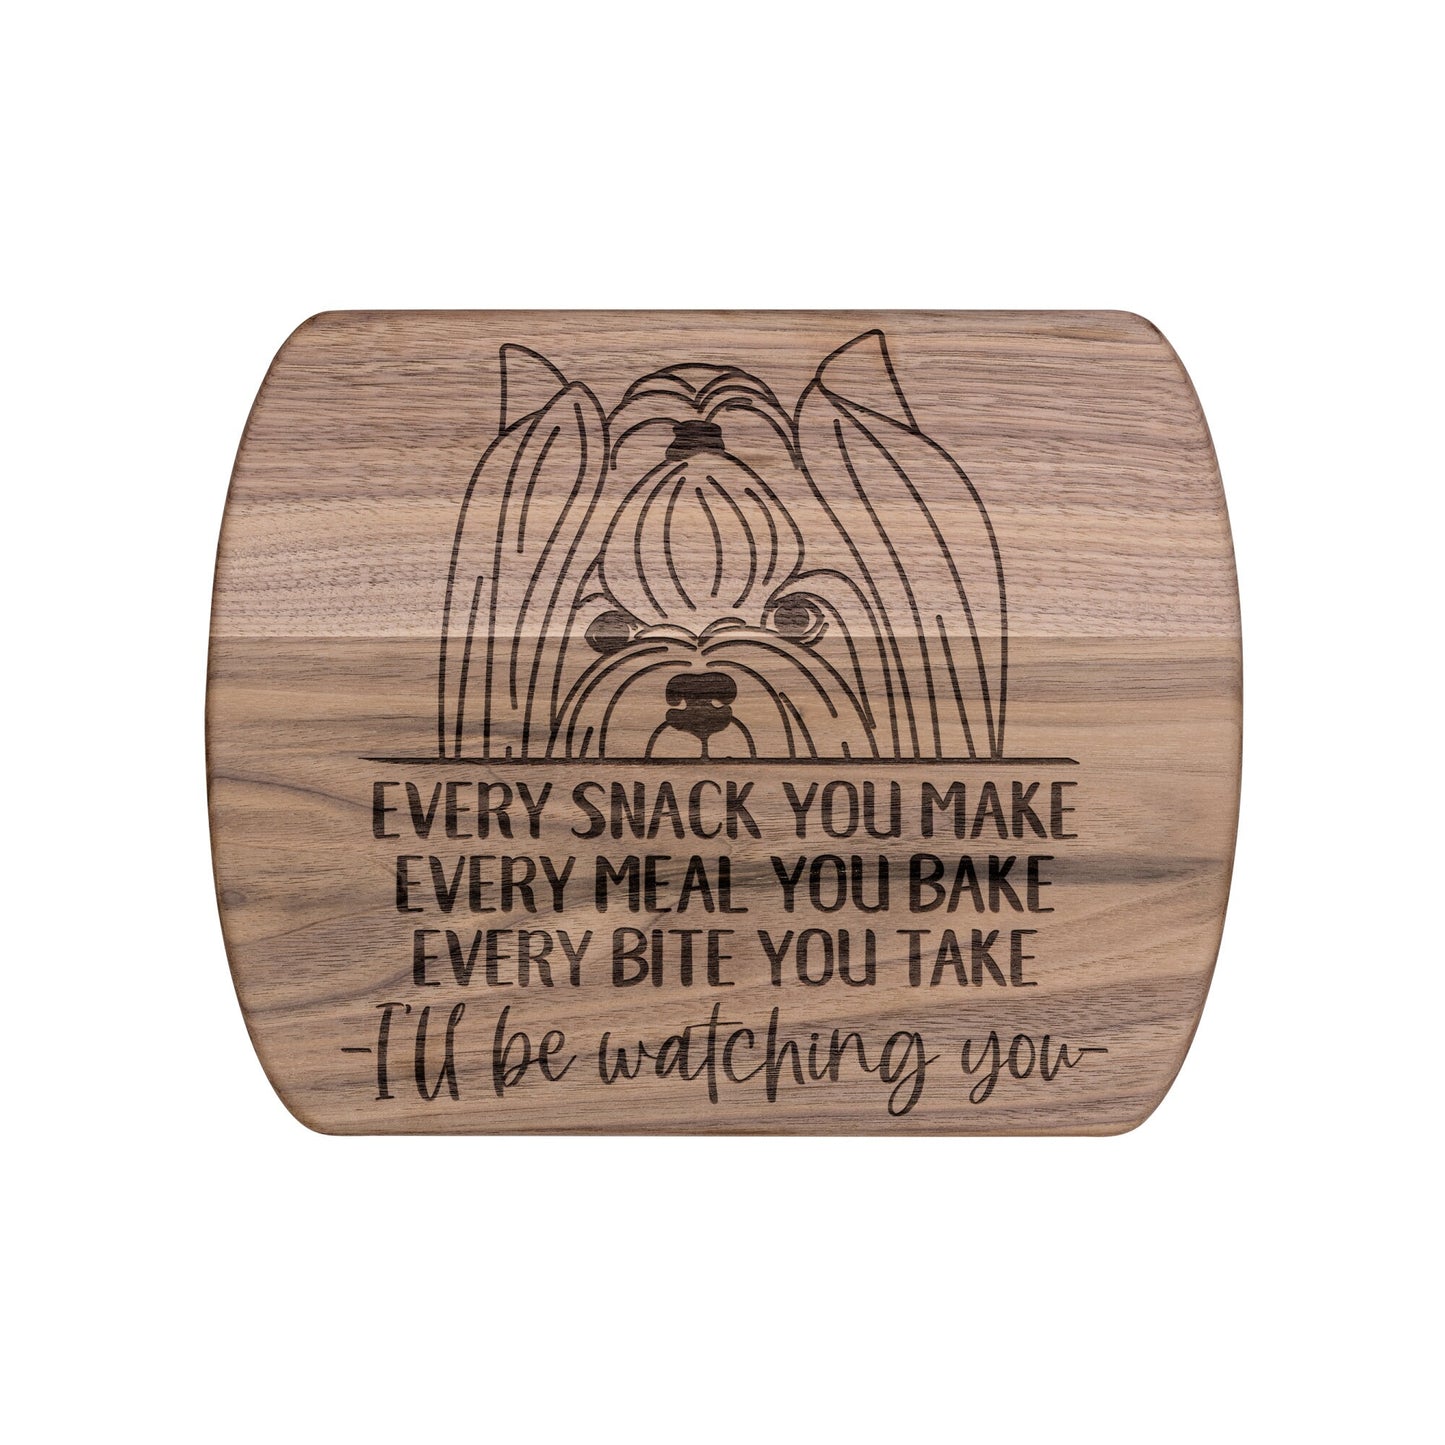 Yorkie Terrier Snack Funny Cutting Board for Dog Mom, Dog Lover Wood Serving Board, Charcuterie Board, Wooden Chopping Board Gifts for Him